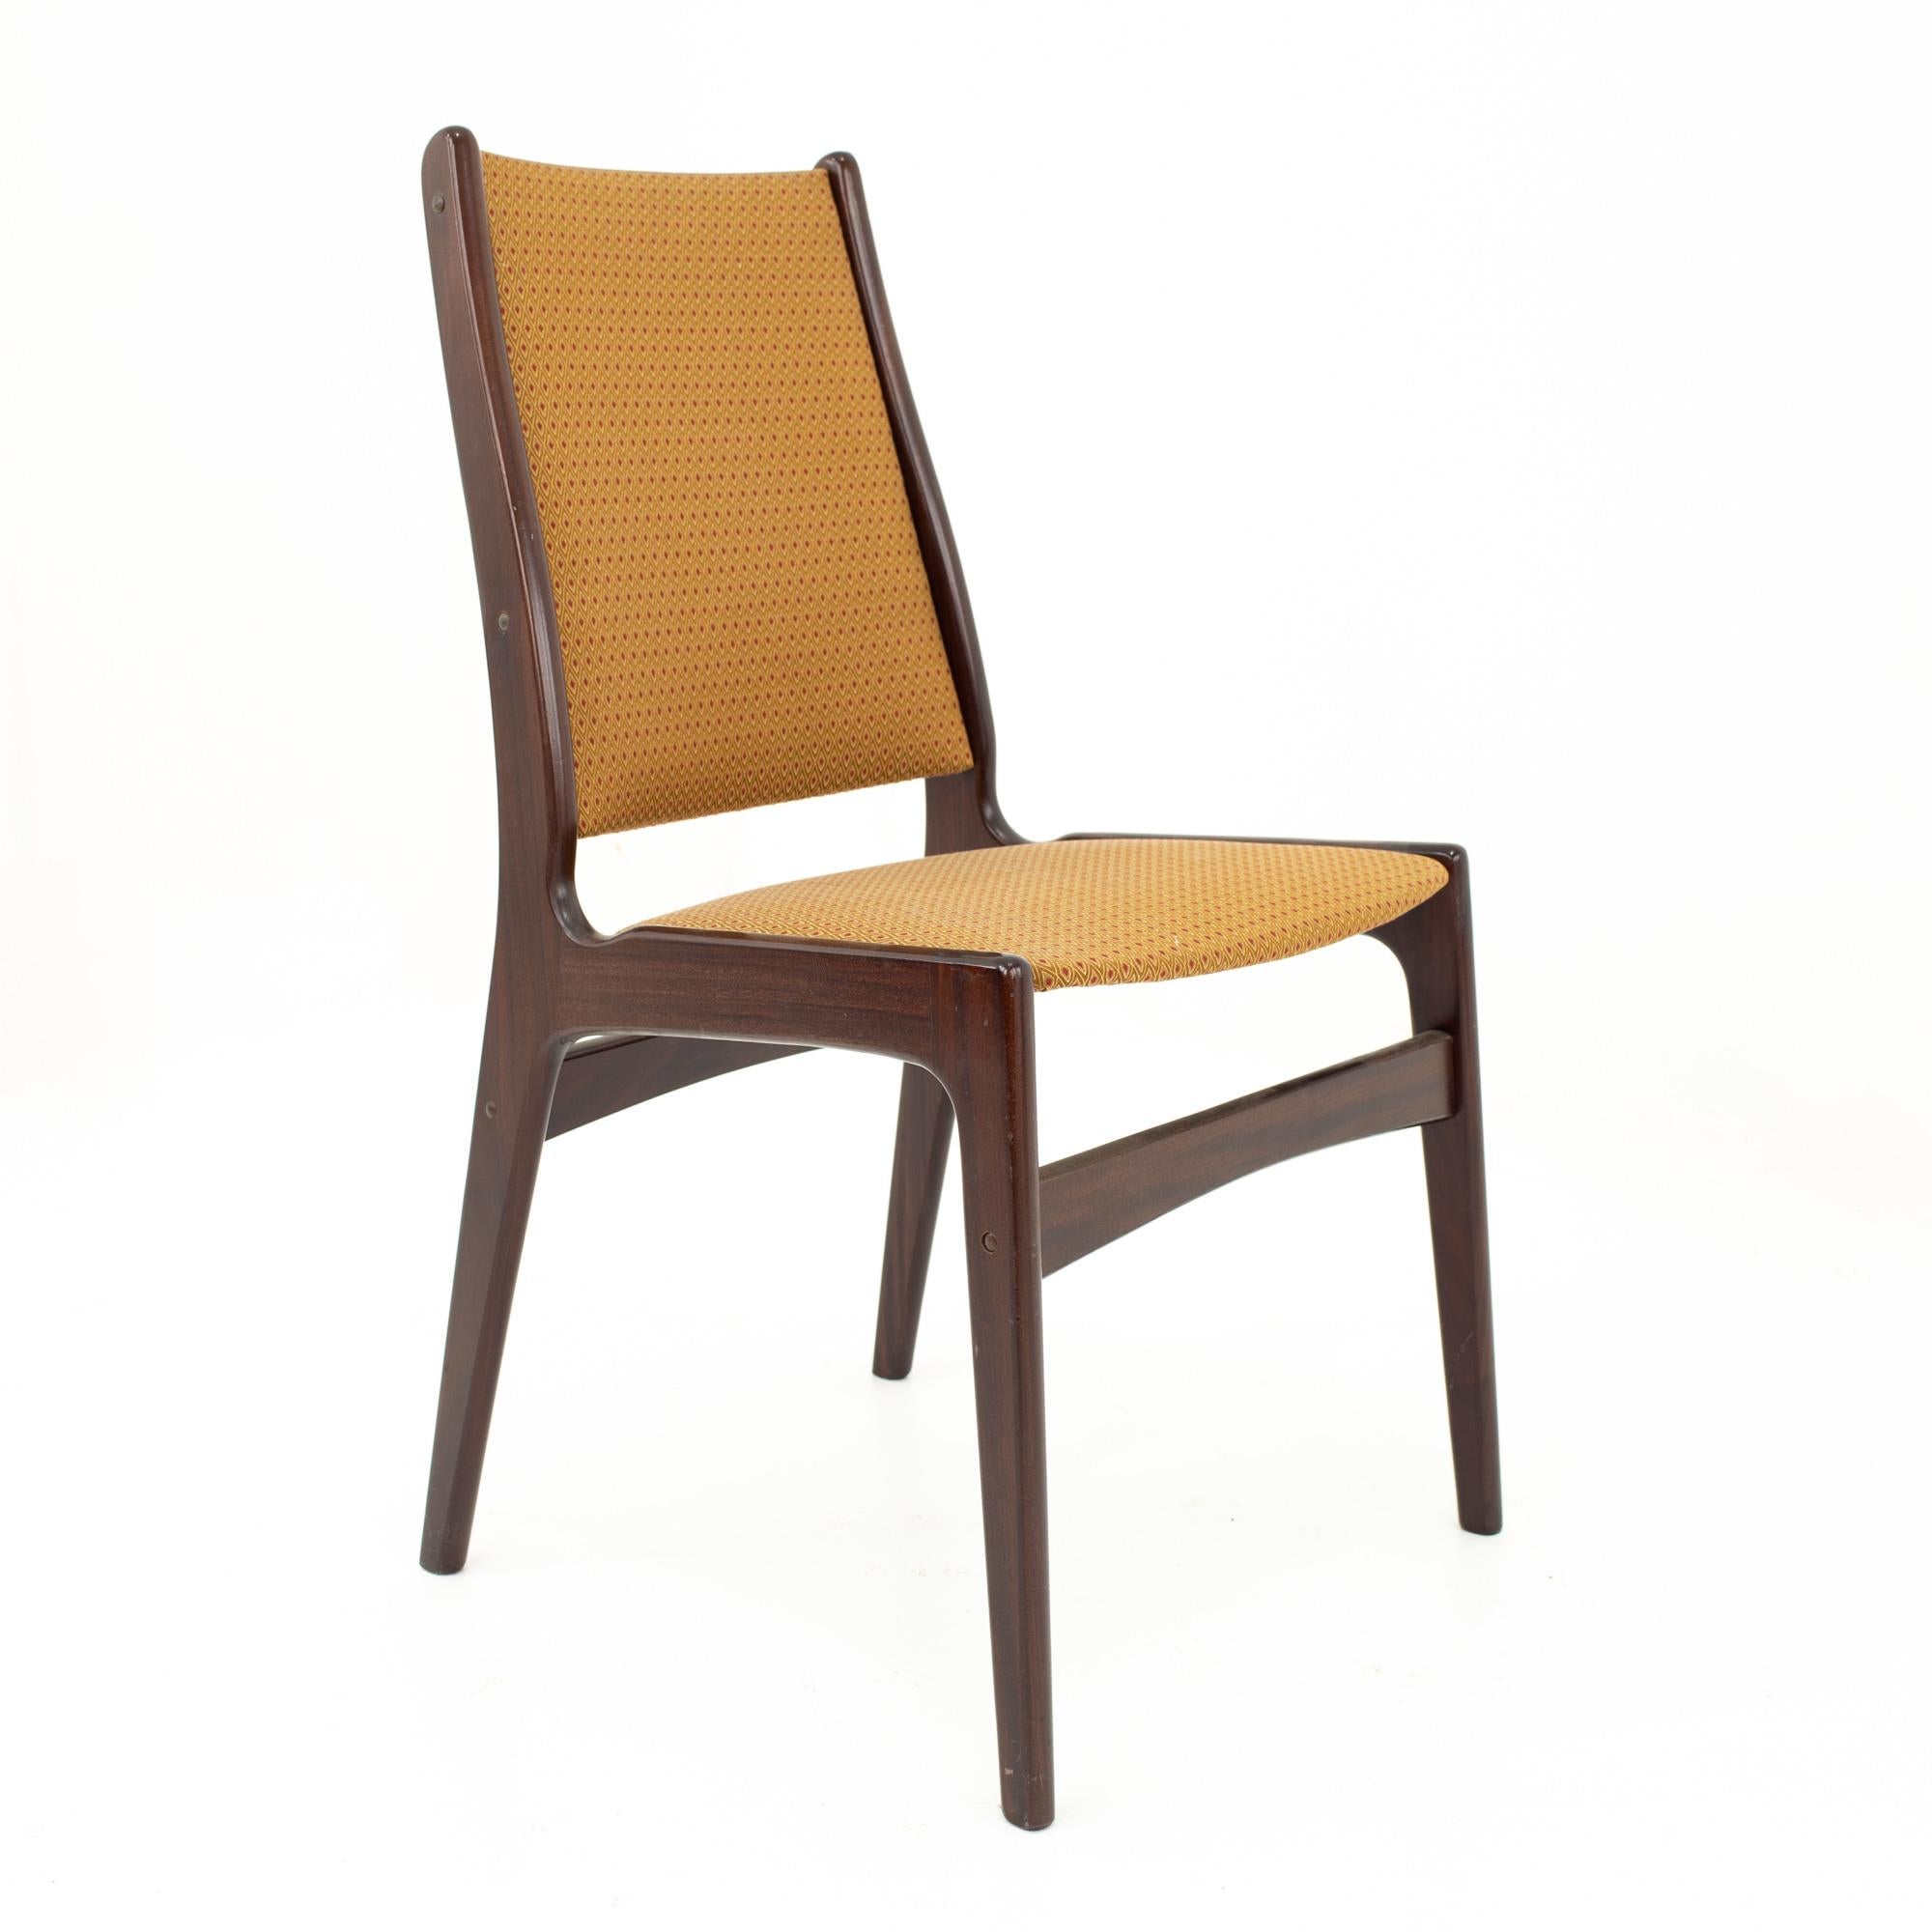 Late 20th Century Danish Midcentury Rosewood Dining Chairs, Set of 6